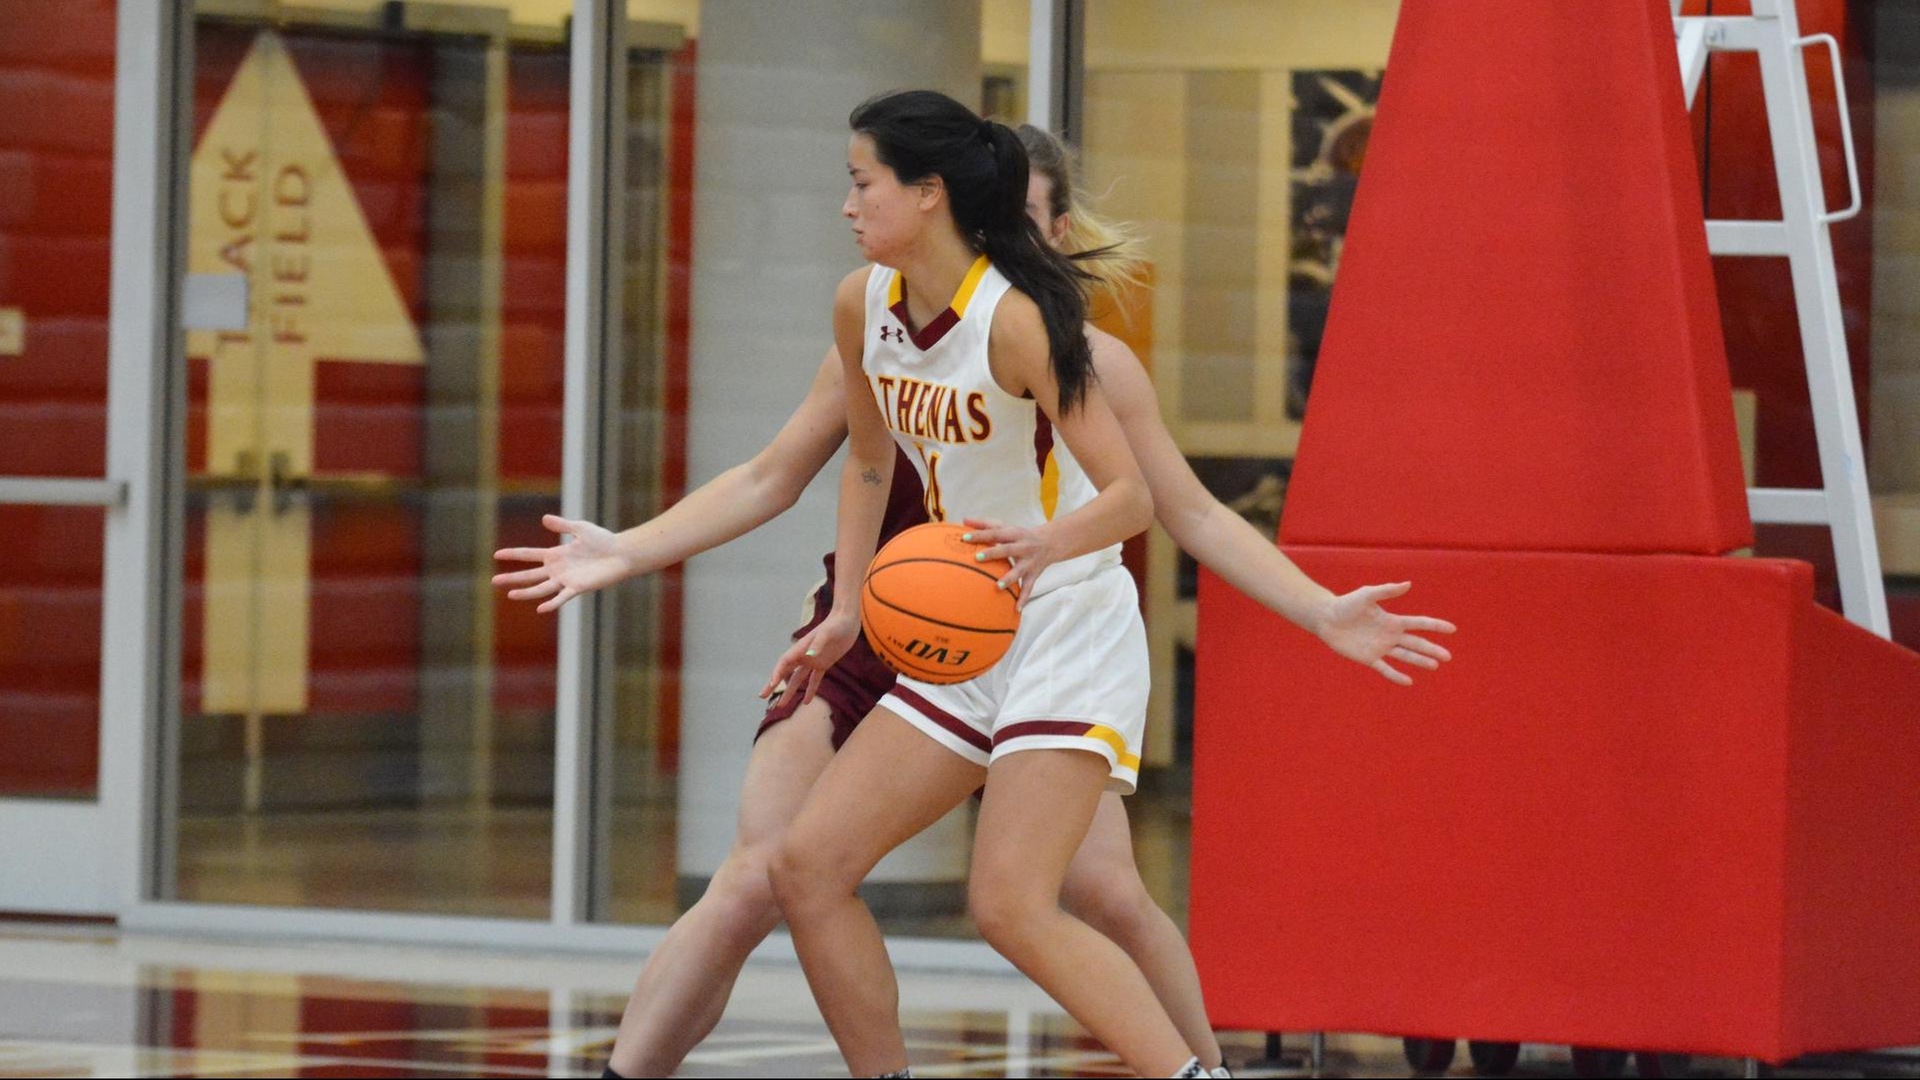 Austyn Masuno's double-double led the way for CMS